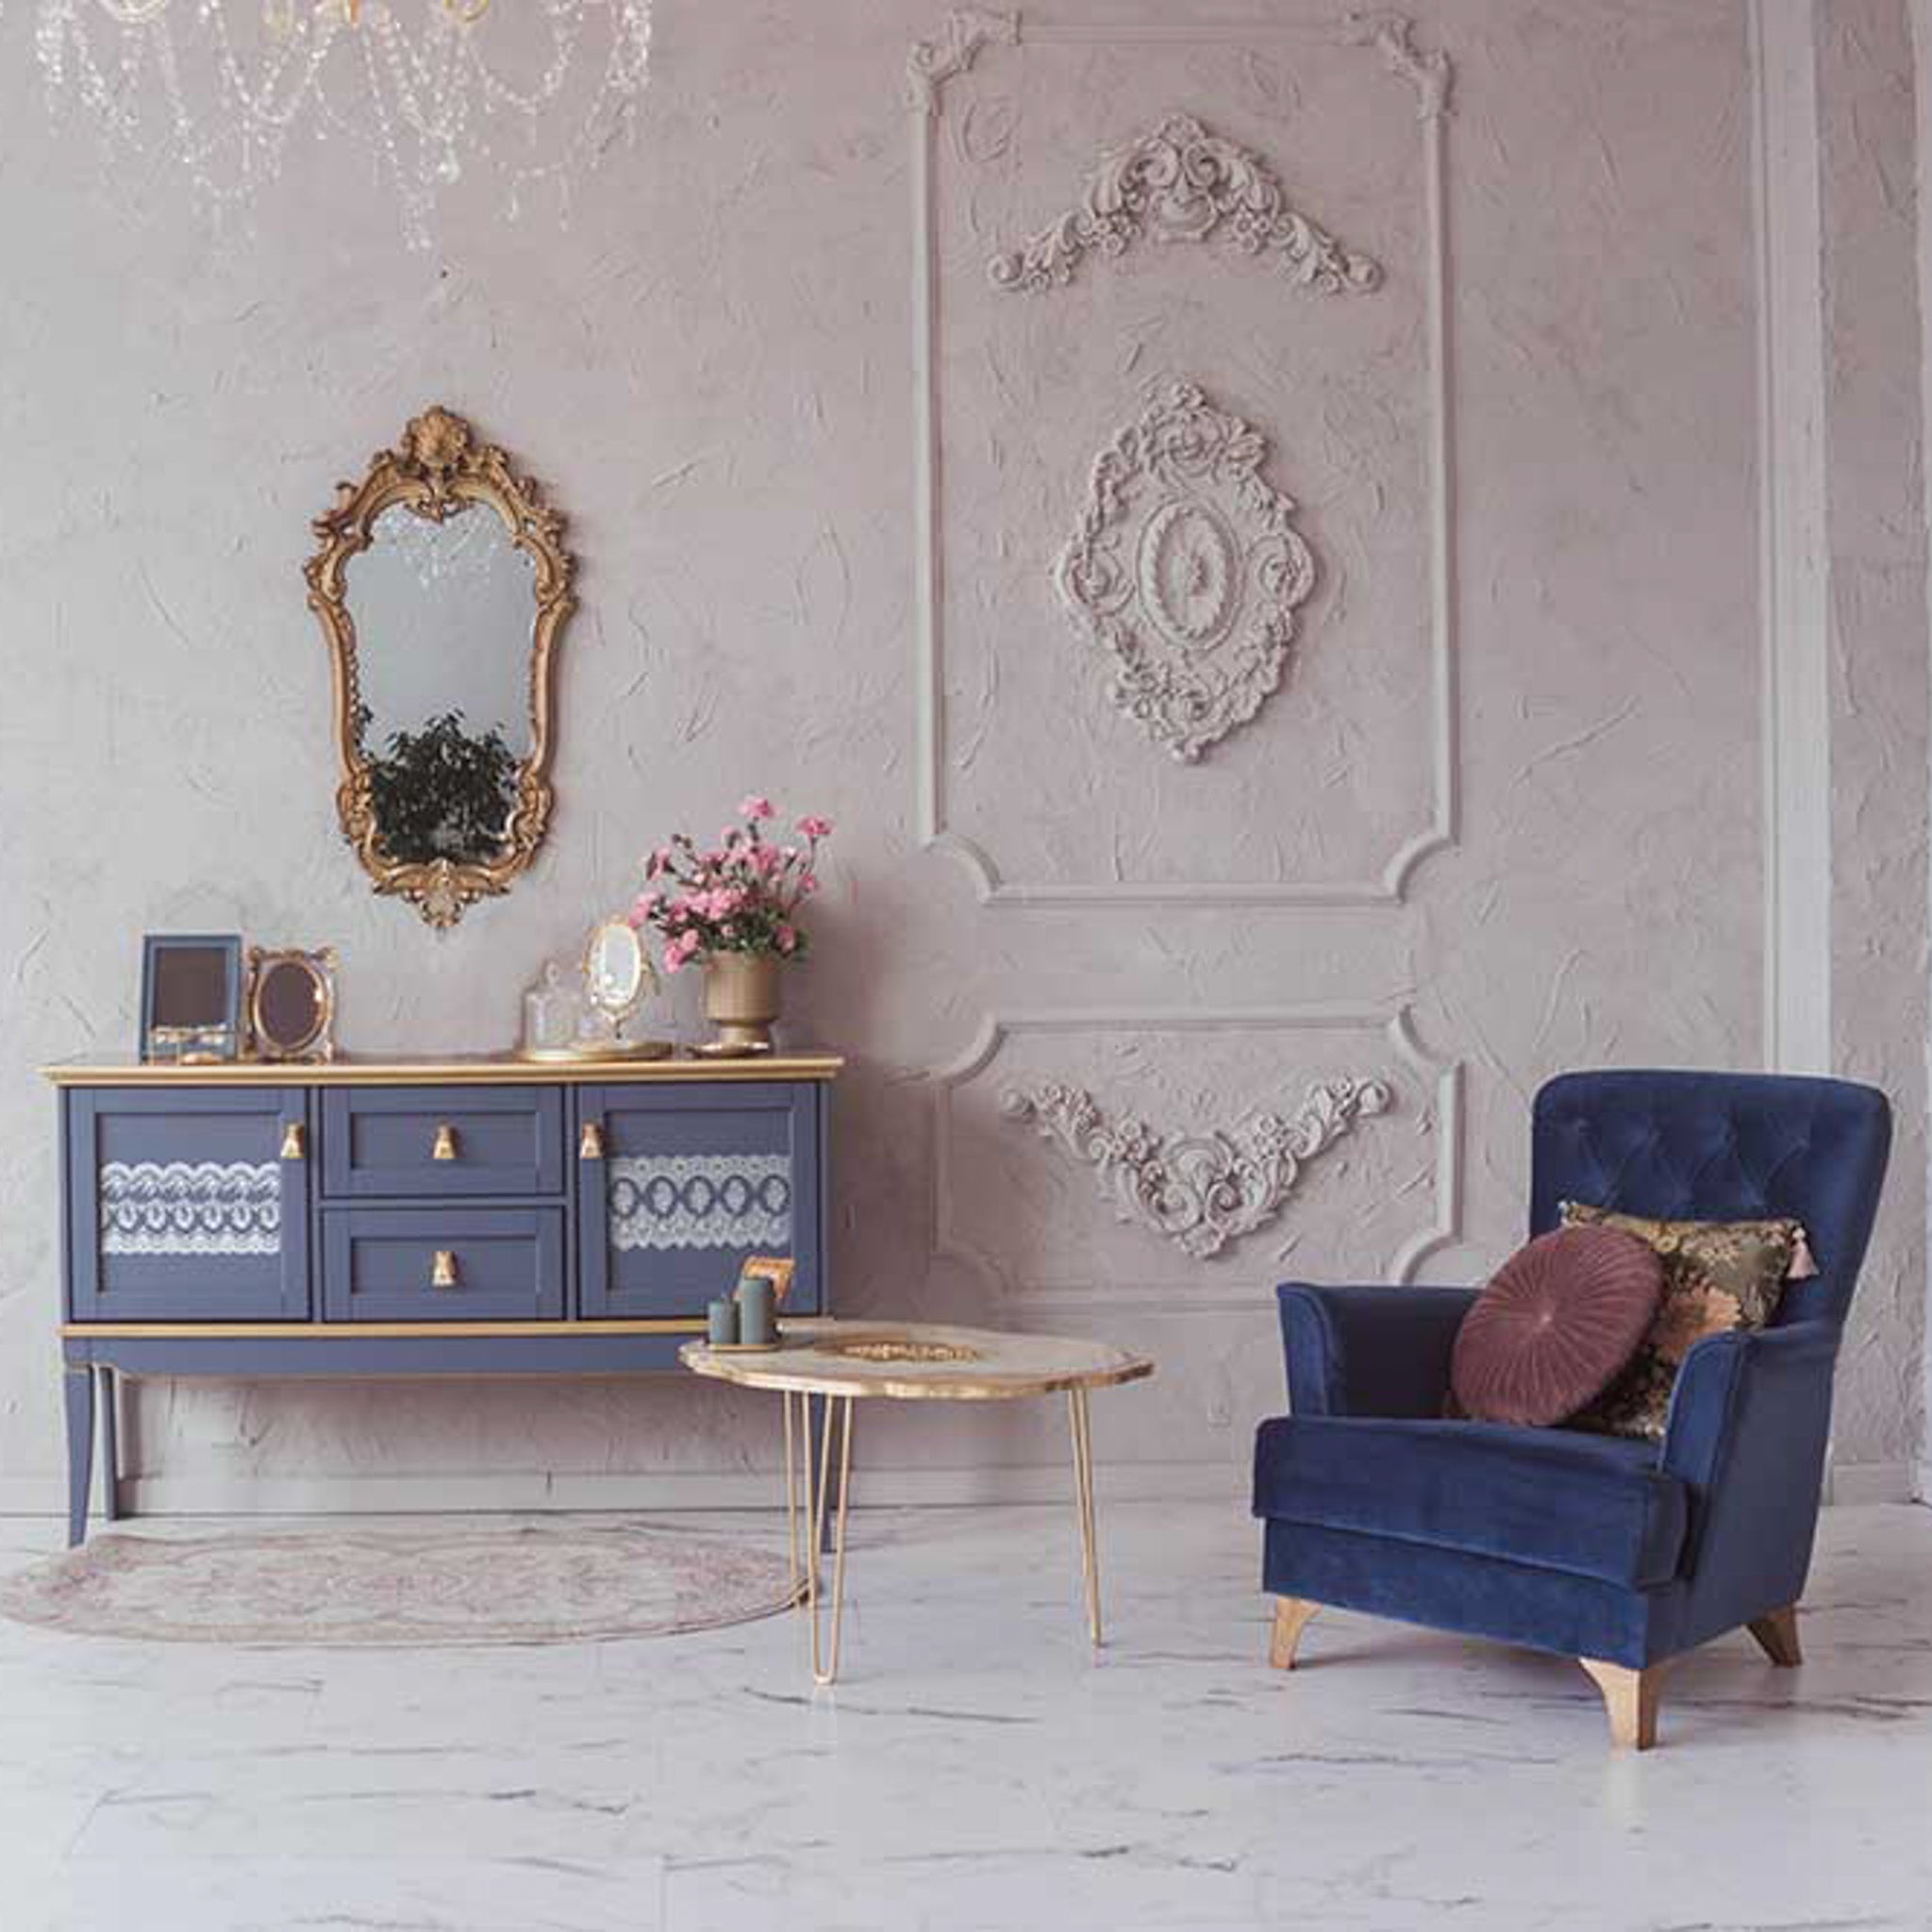 A vintage tv console is painted a muted blue with gold accents and features ReDesign with Prima's Vintage Wallpaper small transfer on its 2 doors.